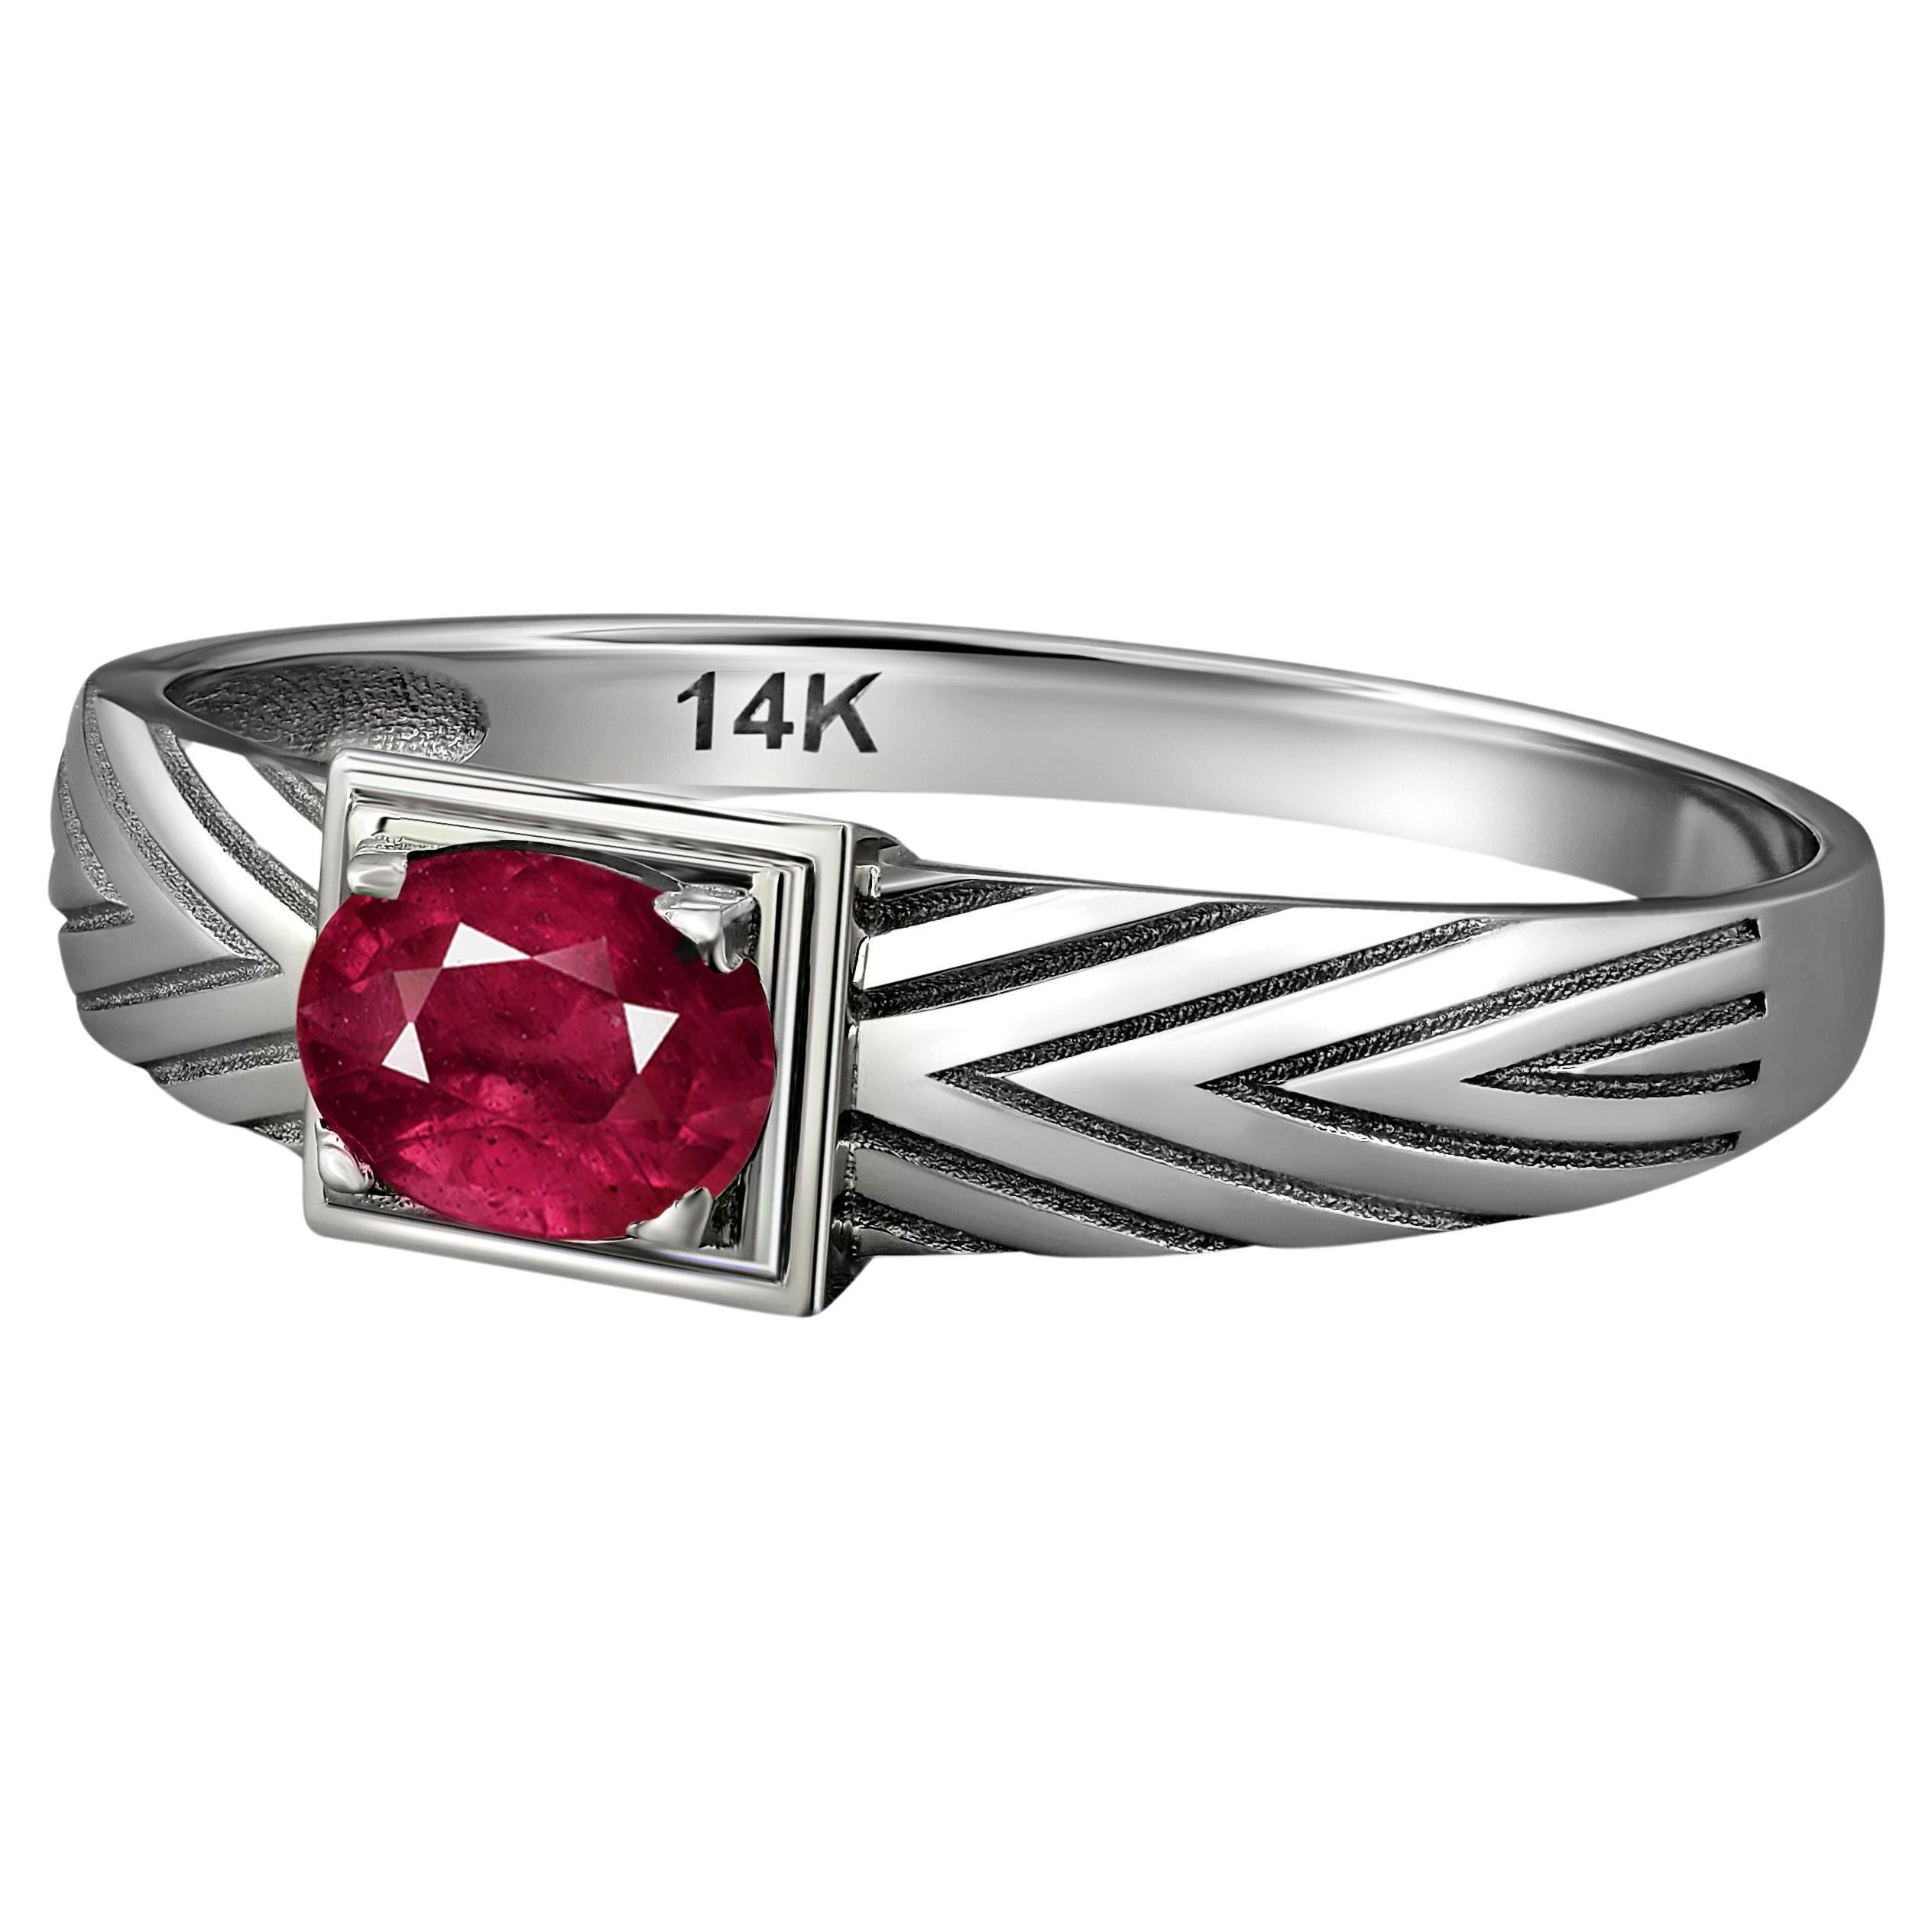 14k Gold Mens Ring with Ruby.  For Sale